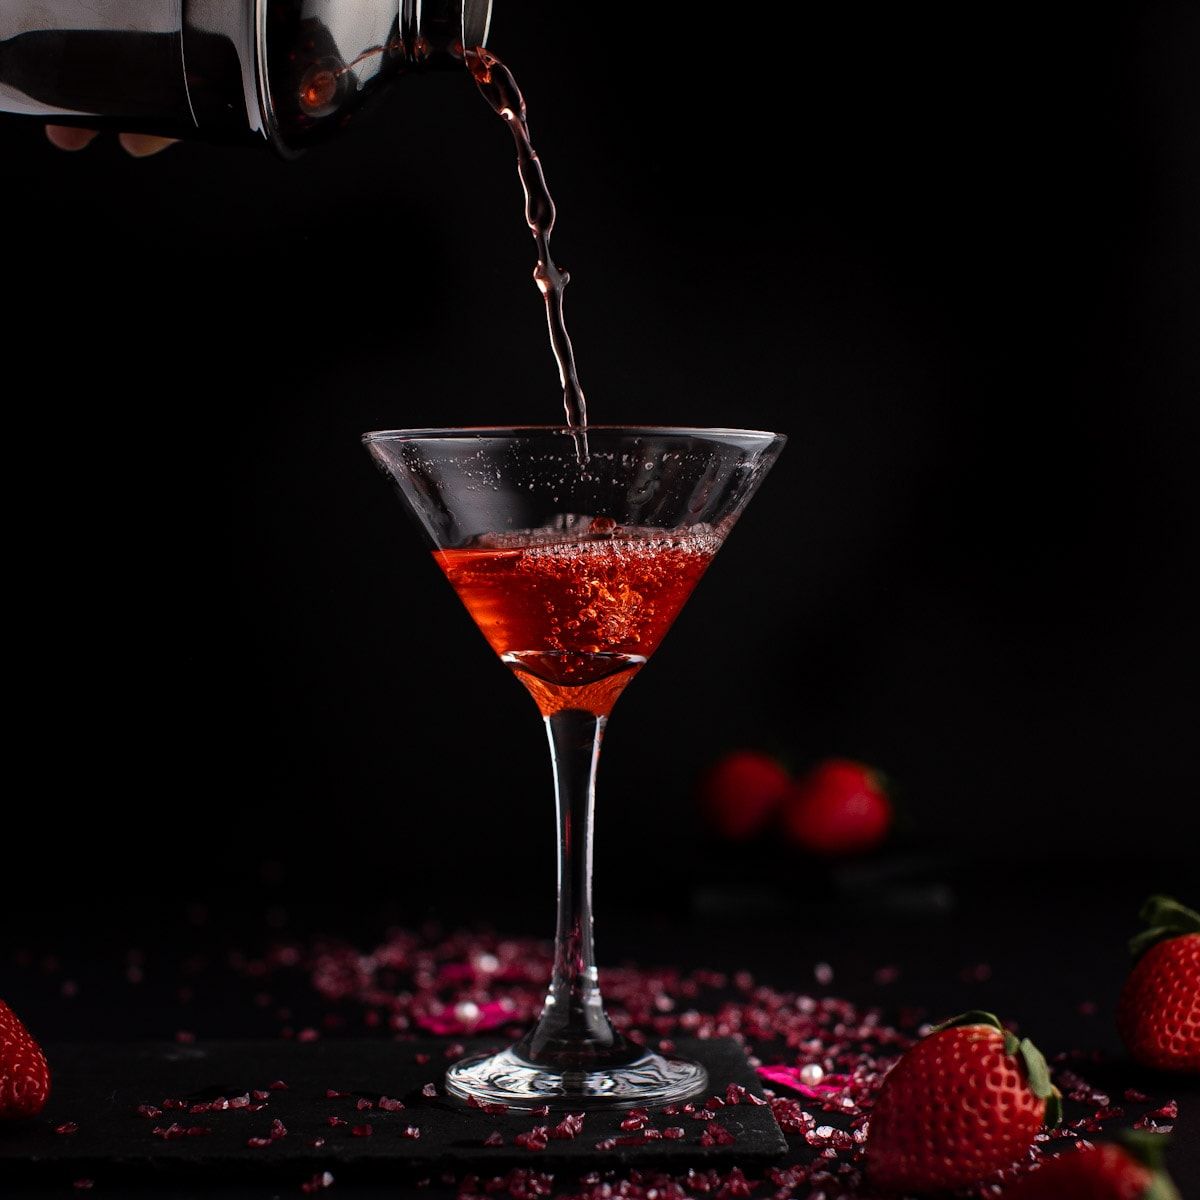 Strawberry Martini (made with REAL strawberries)